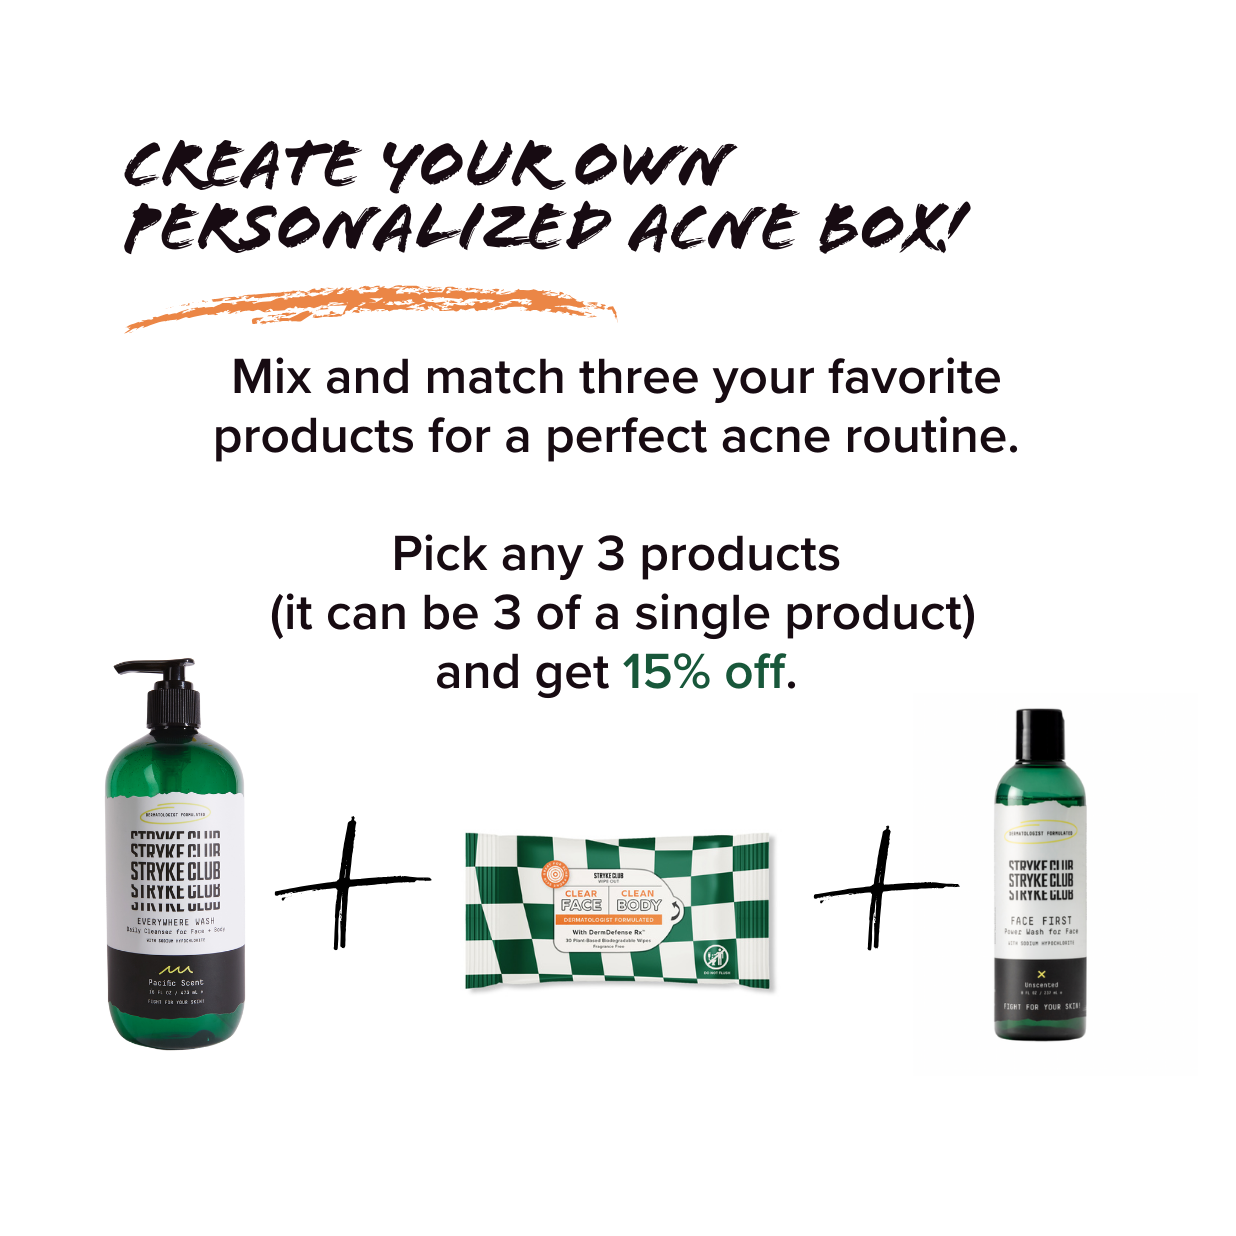 Build your own acne solution.